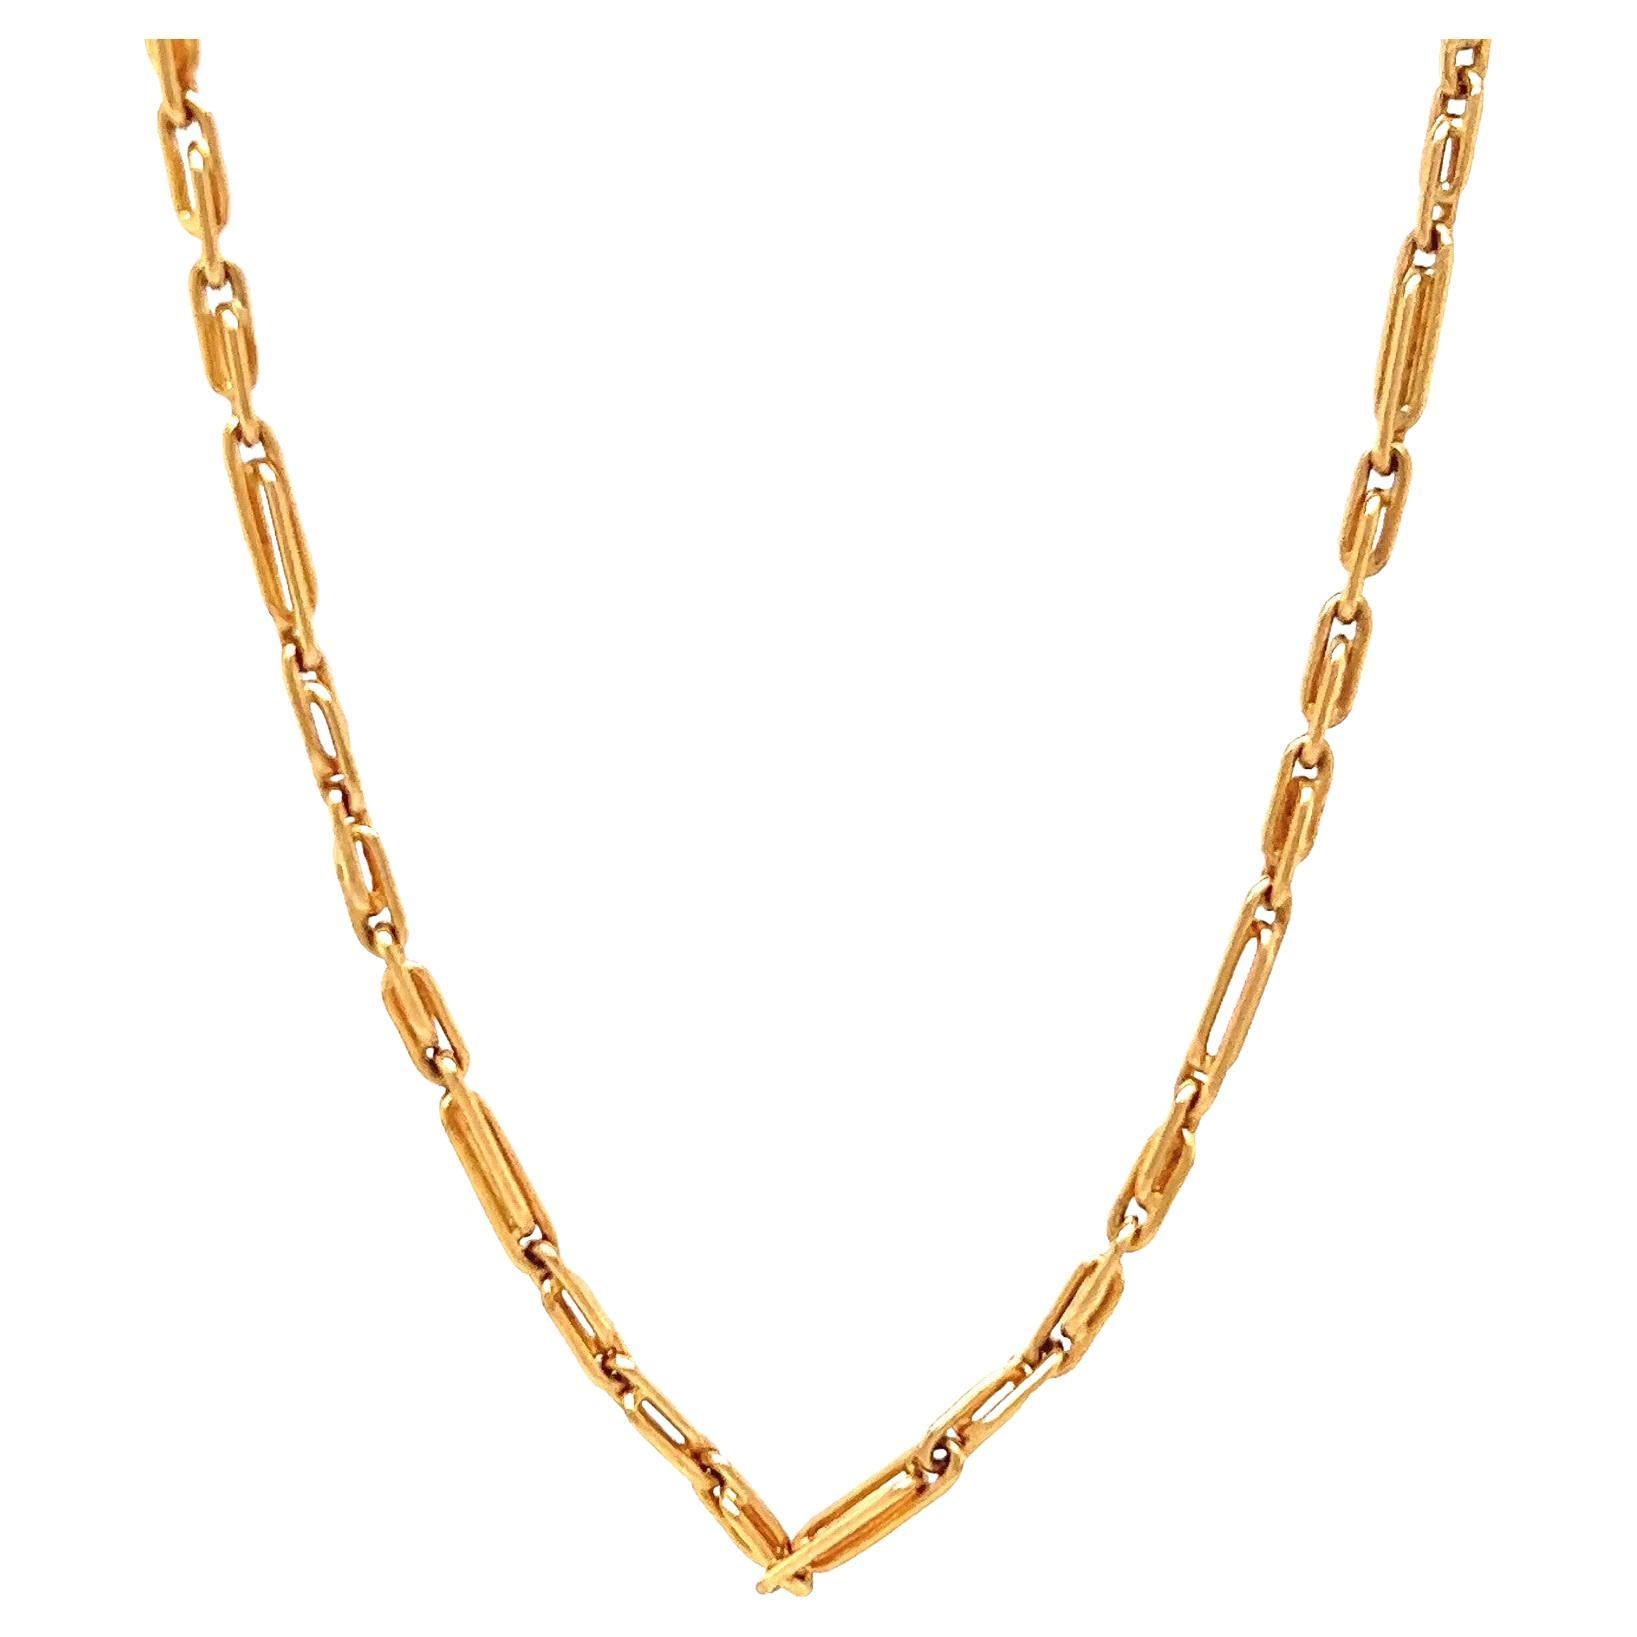 Vintage Italian 18 Karat Yellow Gold Paperclip Link Chain Necklace